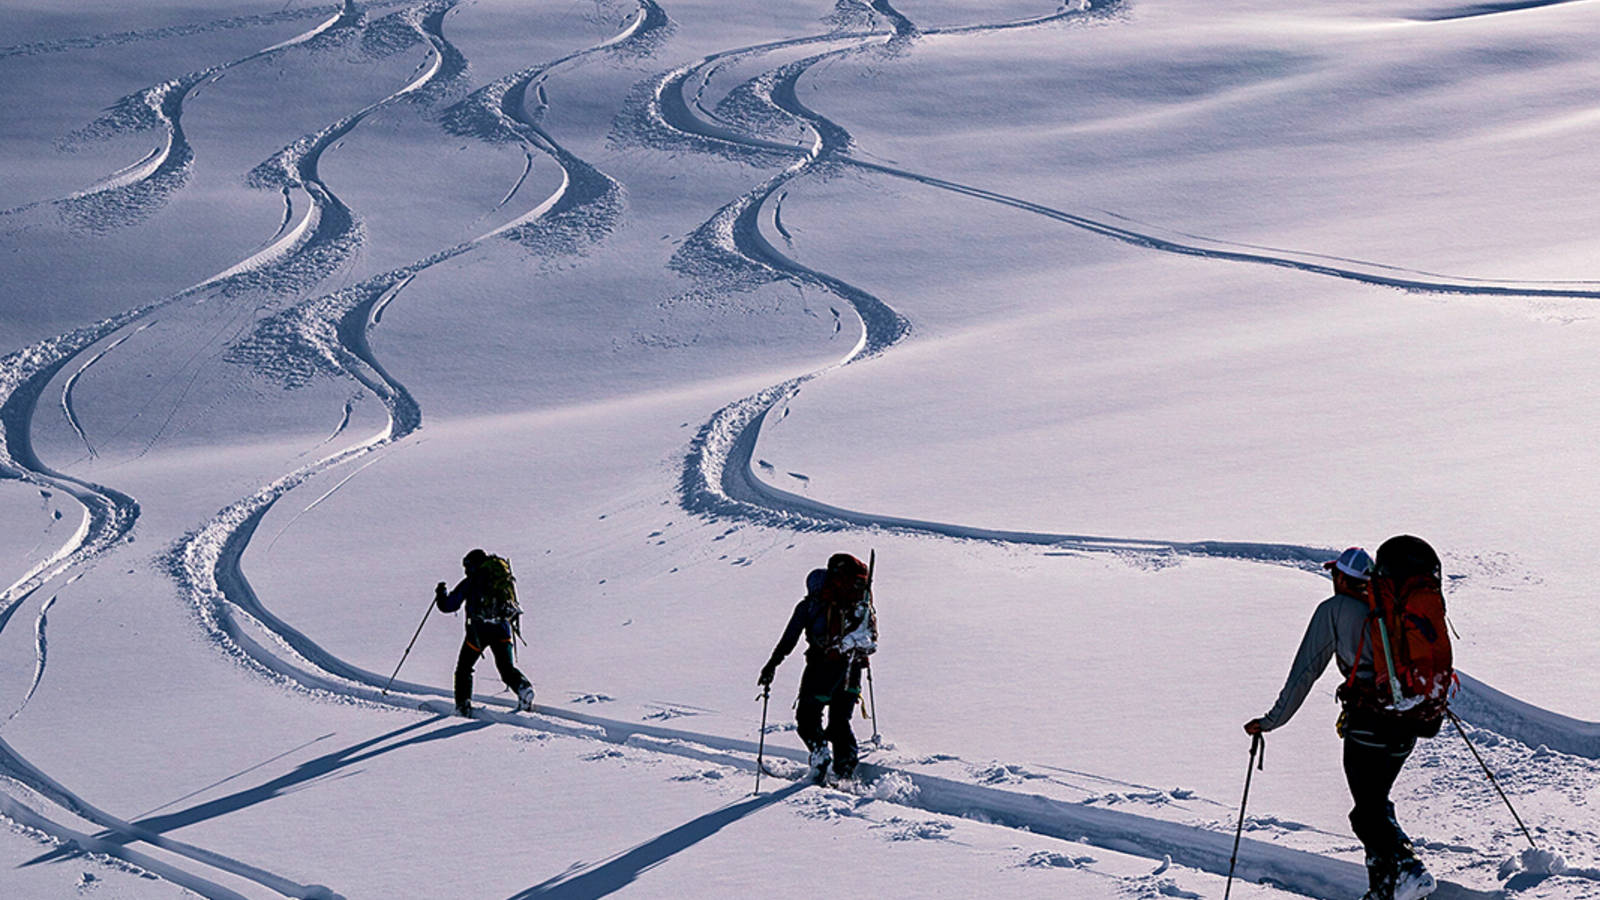 <p>Members of the group retrace their tracks as they head back up to the peak. Over the course of six days, they climbed over 19,000 feet of elevation on their skis.</p>
<p> </p>